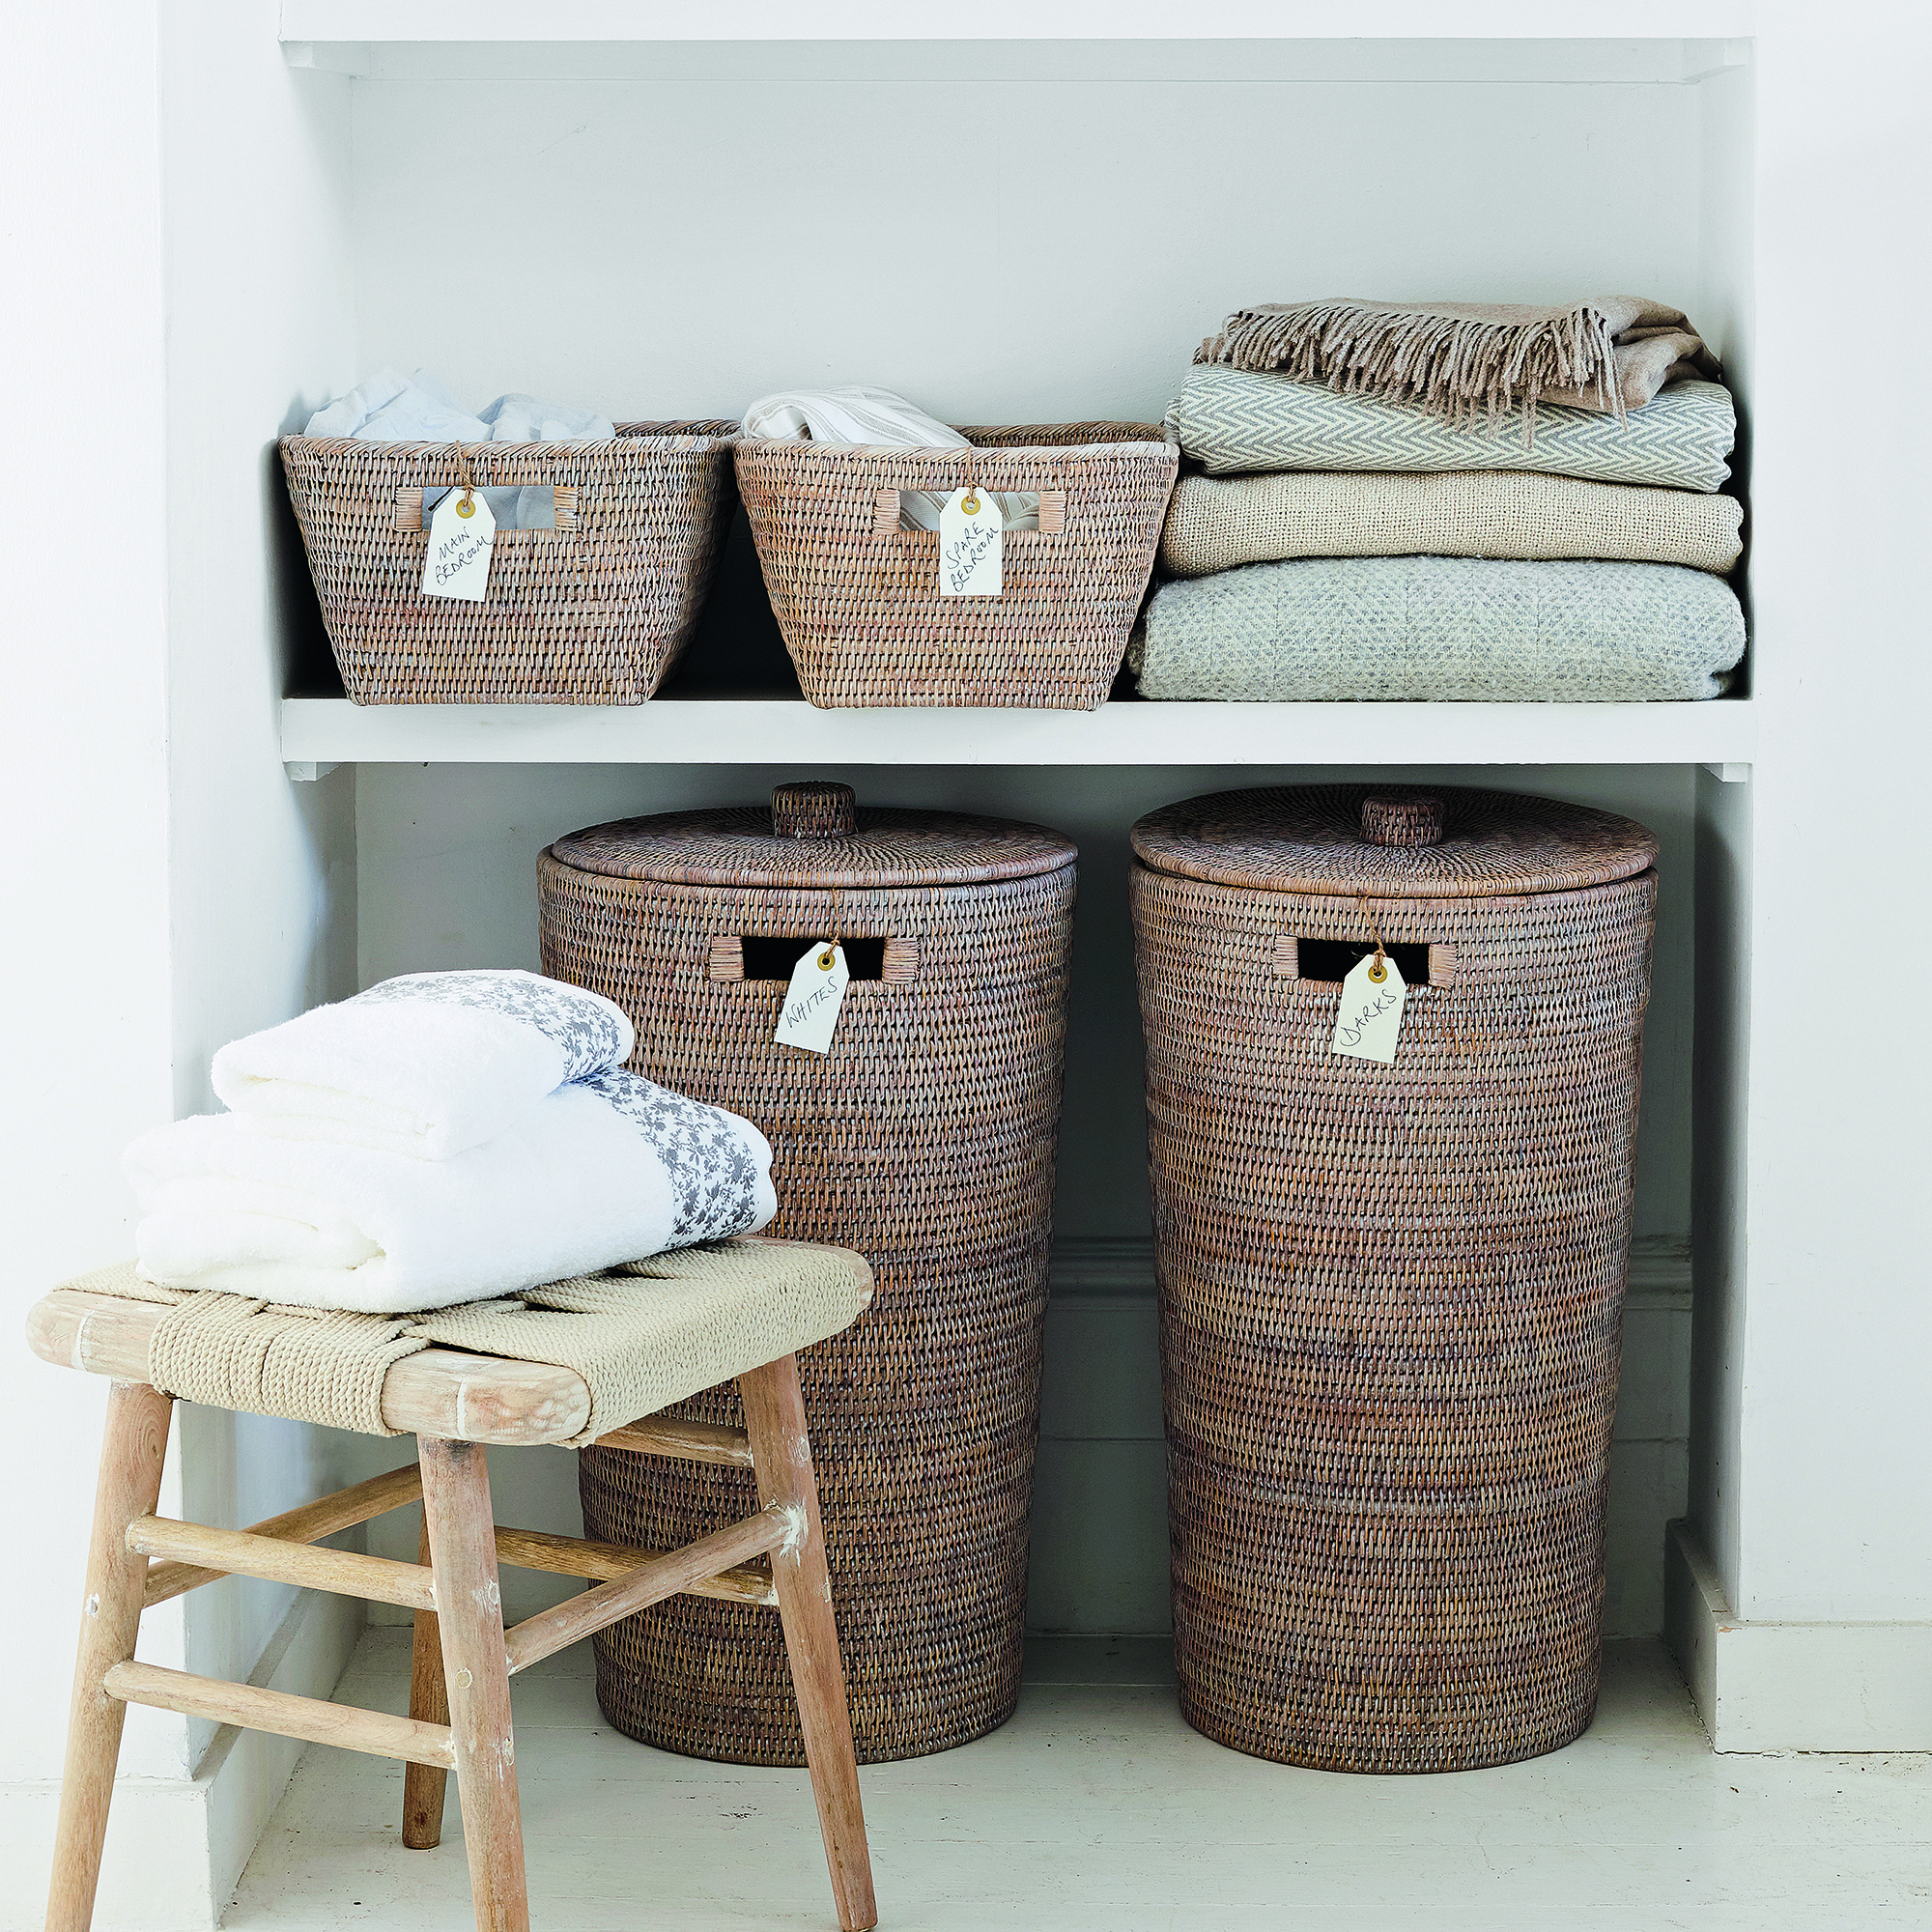 Linen cupboard with rattan baskets and folded towels